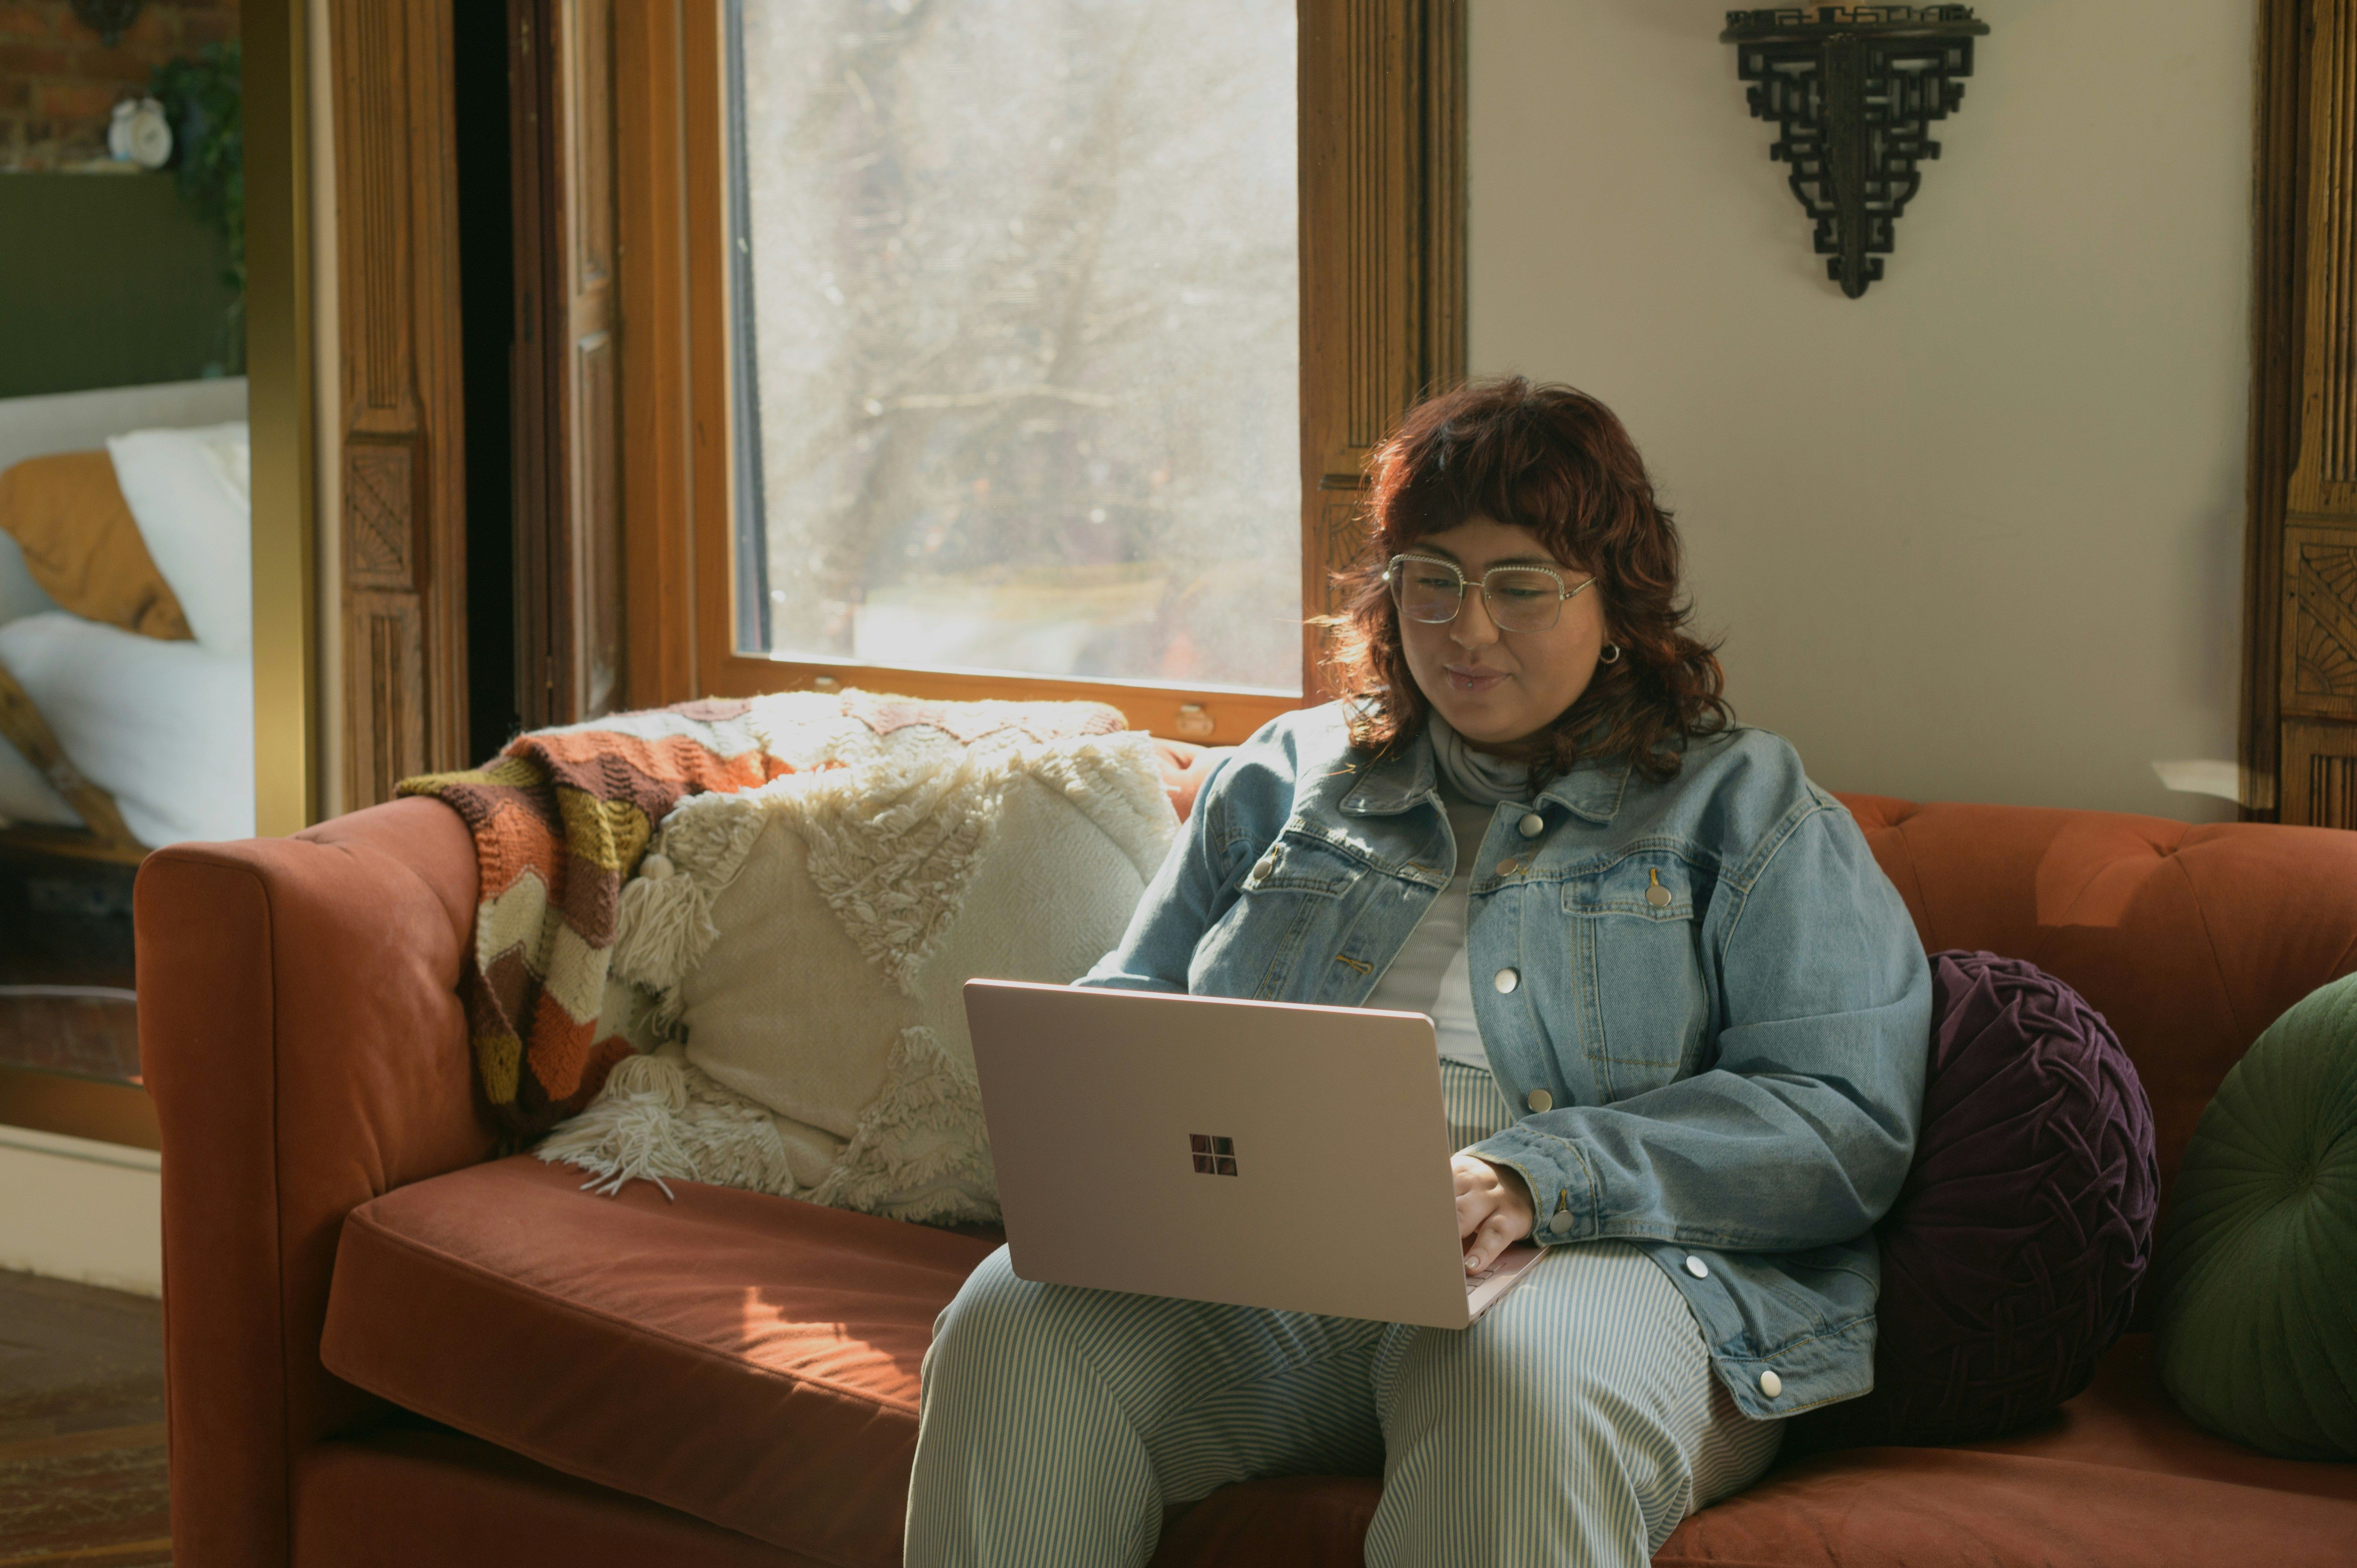 A person with long red hair sits on a red couch, dressed in all denim, looking down at a laptop.